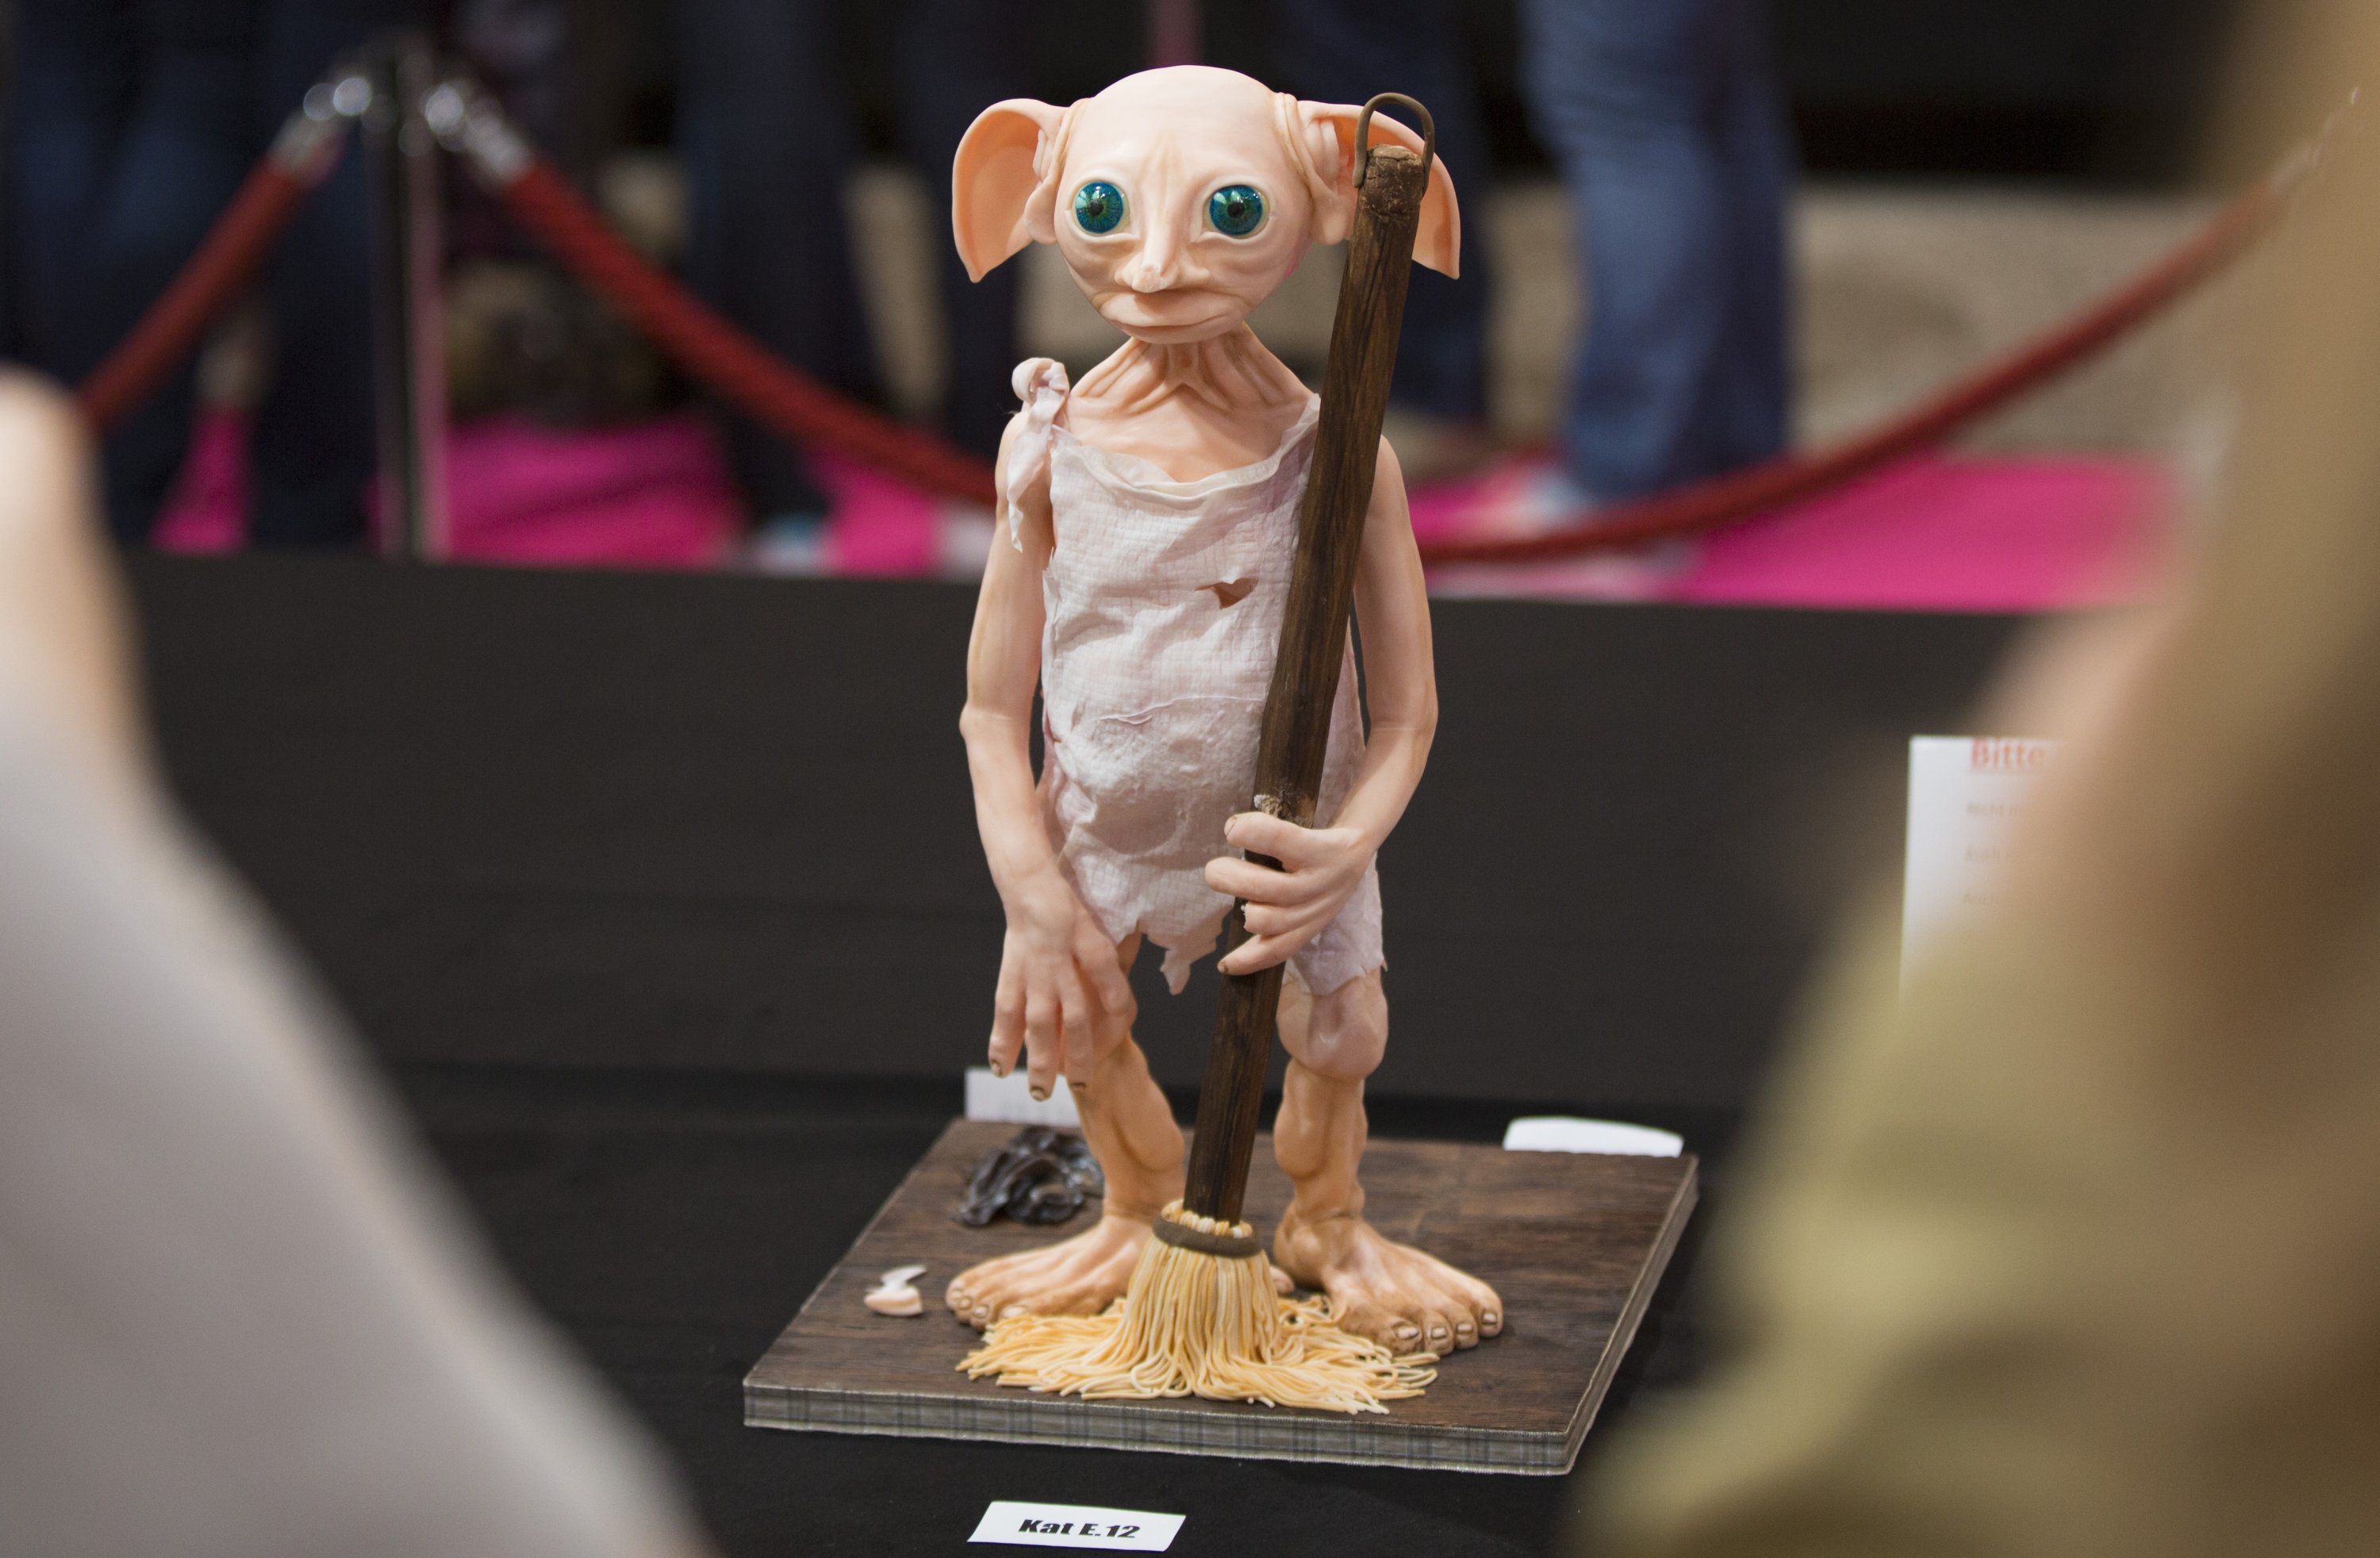 Such a beautiful place': Harry Potter's Dobby grave sparks sock debate